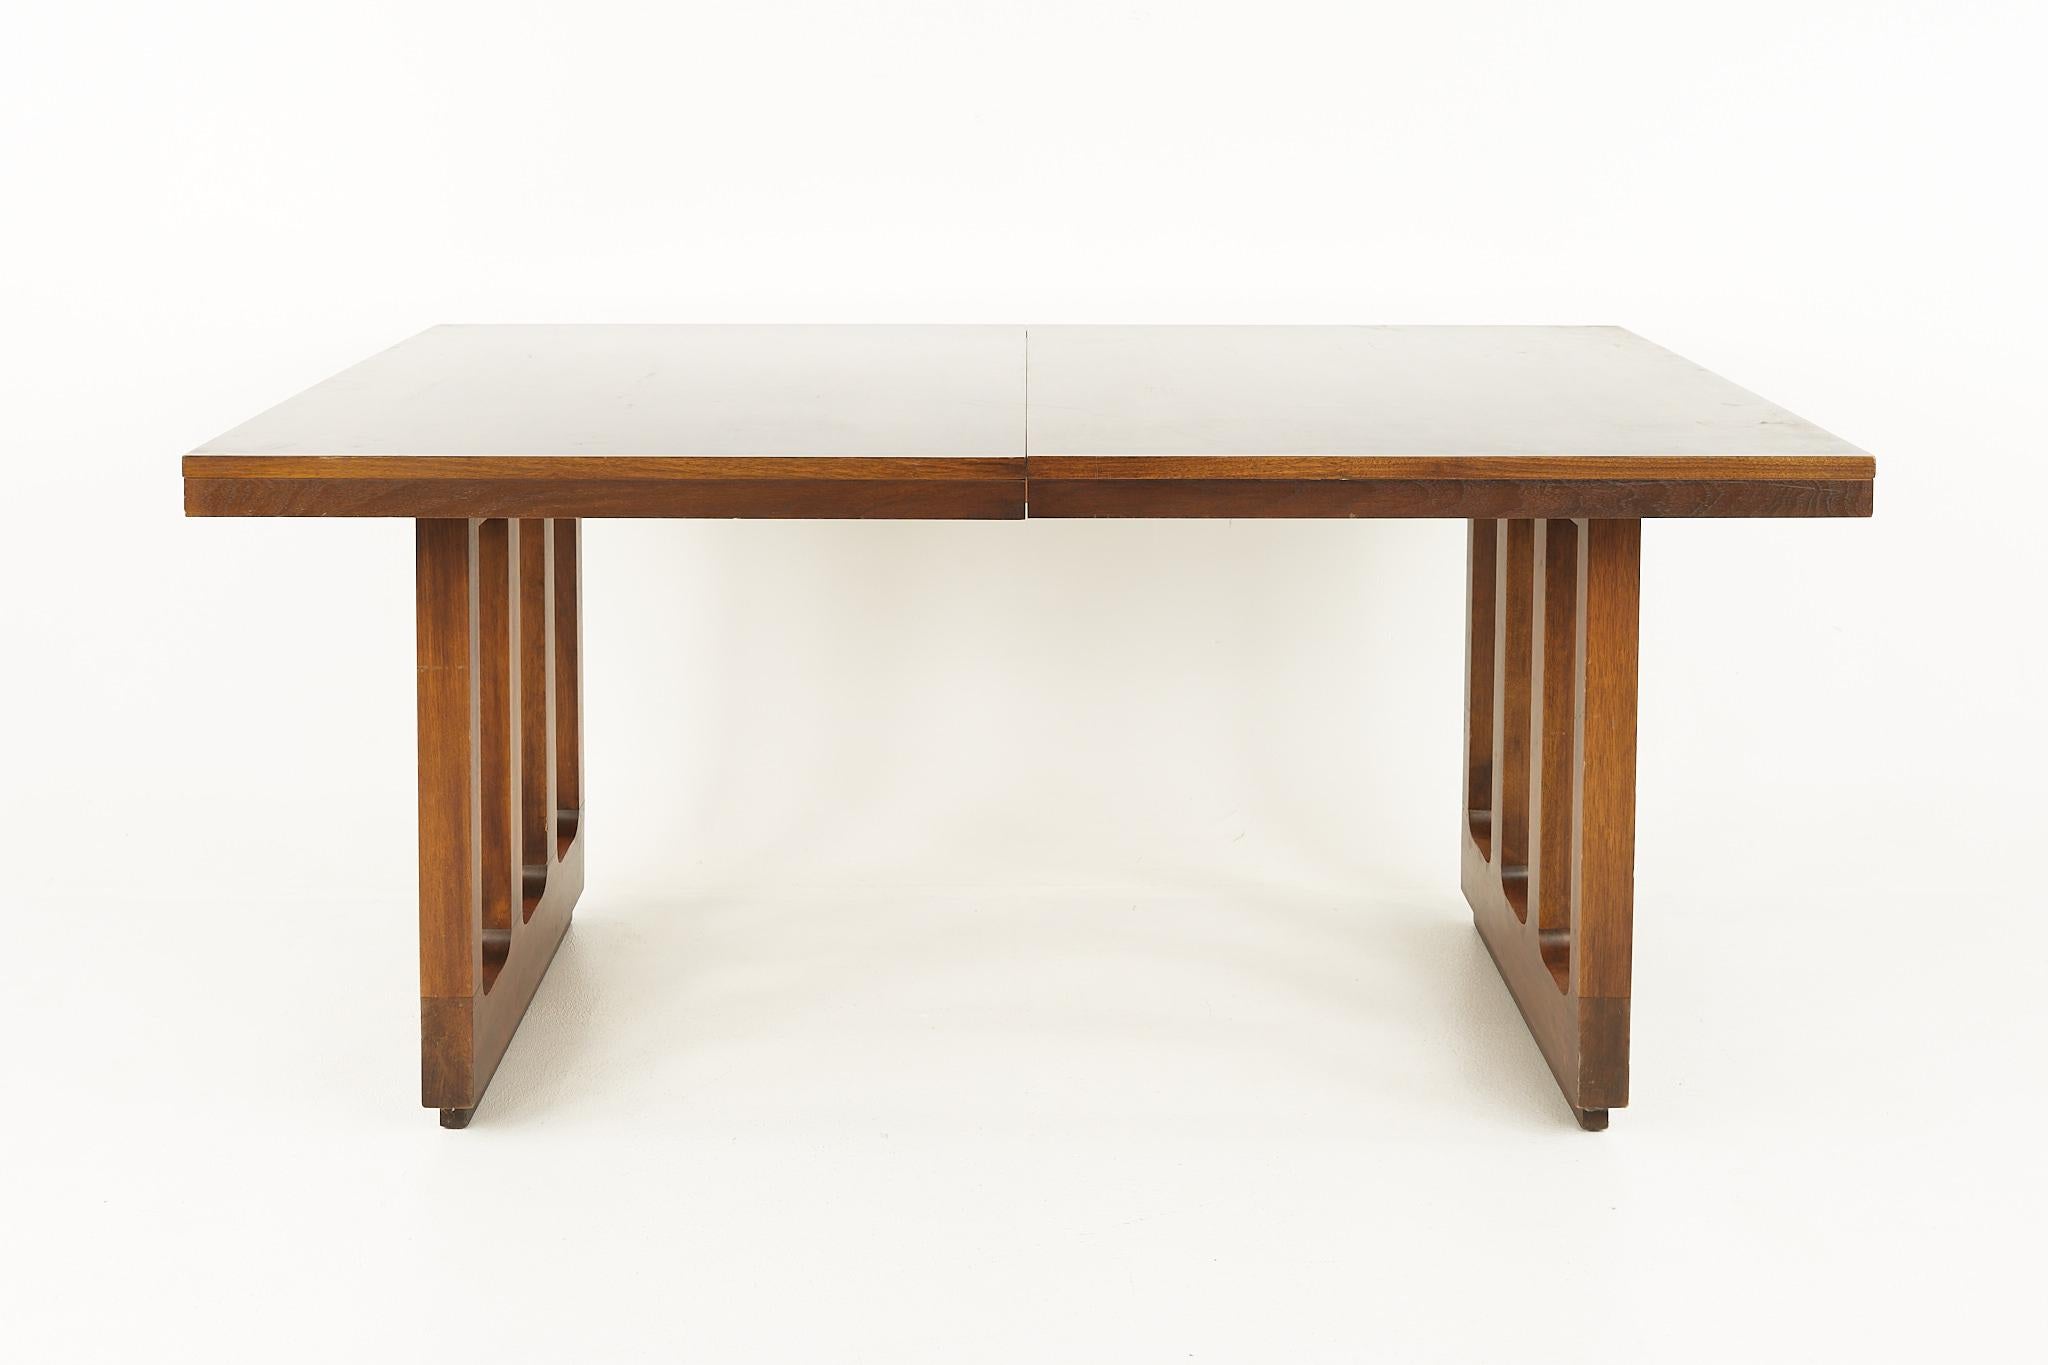 Mid century walnut dining table

This table measures: 64 wide x 44 deep x 29.75 inches high, with a chair clearance of 27.25 inches

All pieces of furniture can be had in what we call restored vintage condition. That means the piece is restored